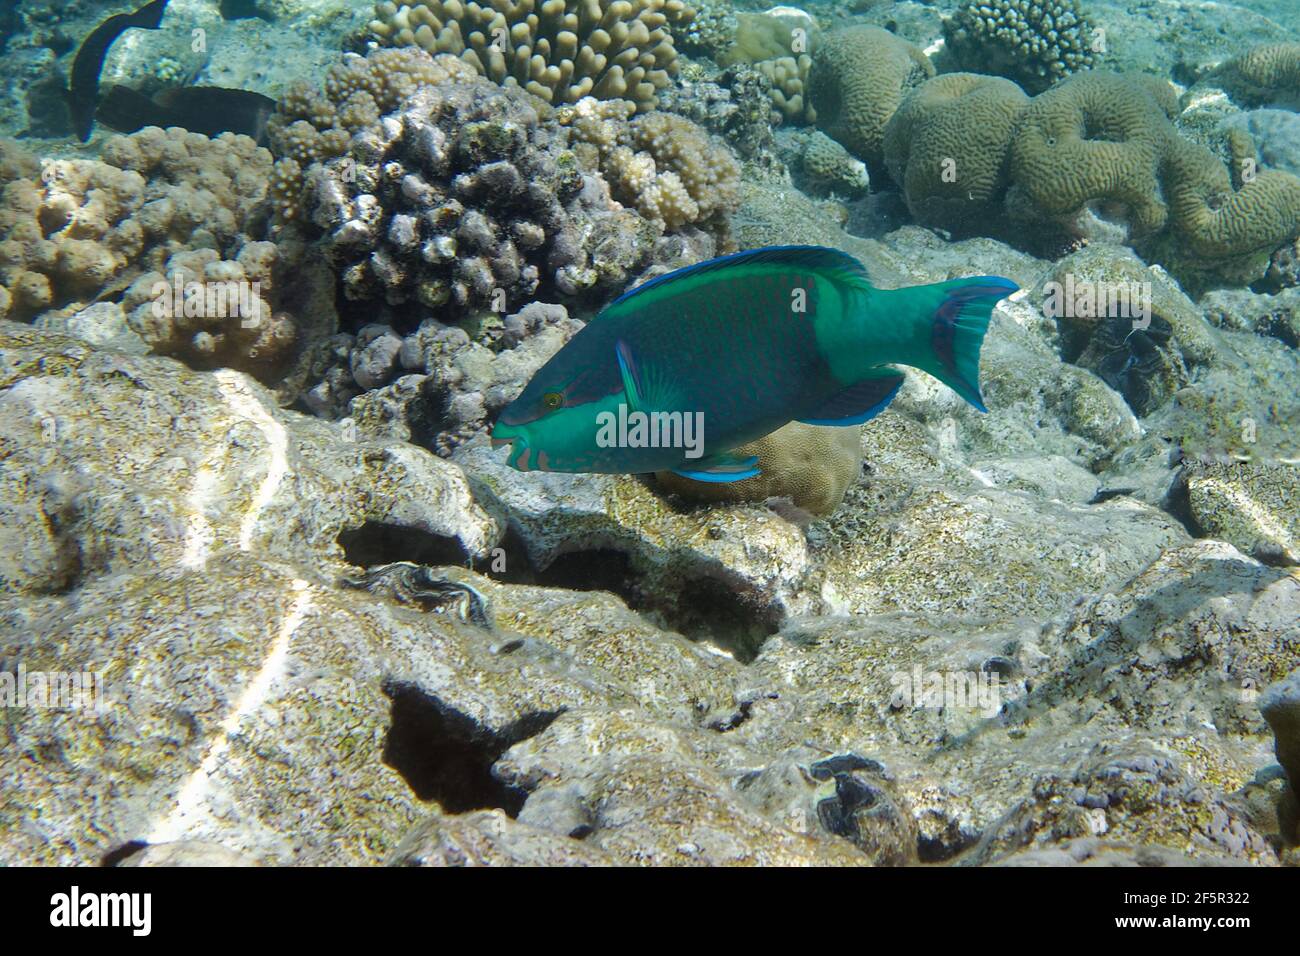 Bridled parrotfish or Sixband parrotfish (Scarus frenatus) in Red Sea Stock Photo